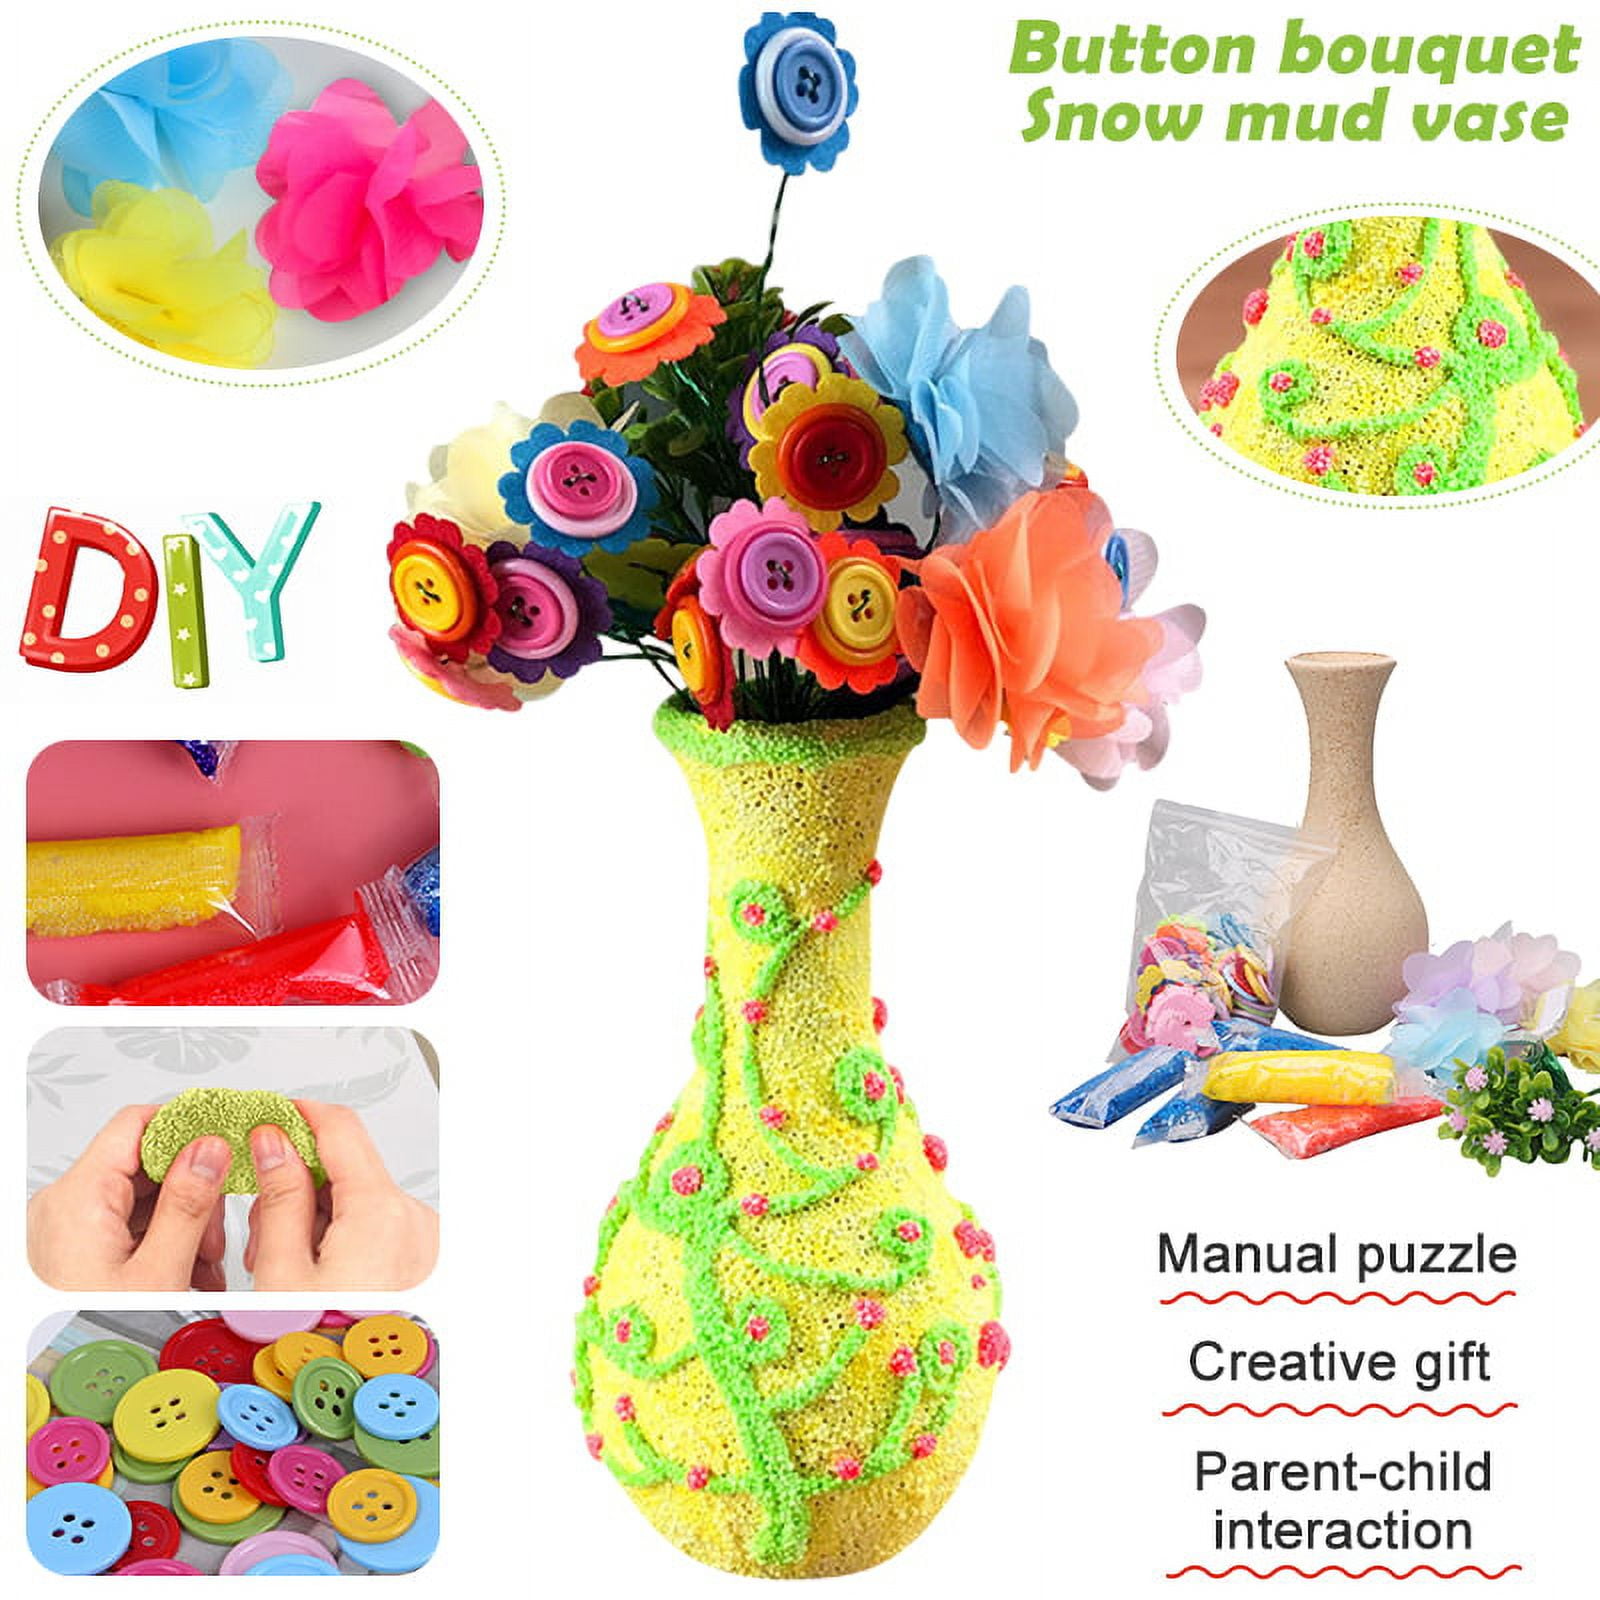 JBee Ctrl Gifts for Girls Age 5 6 7 8 9, Unicorn Toys for 5-8 Year